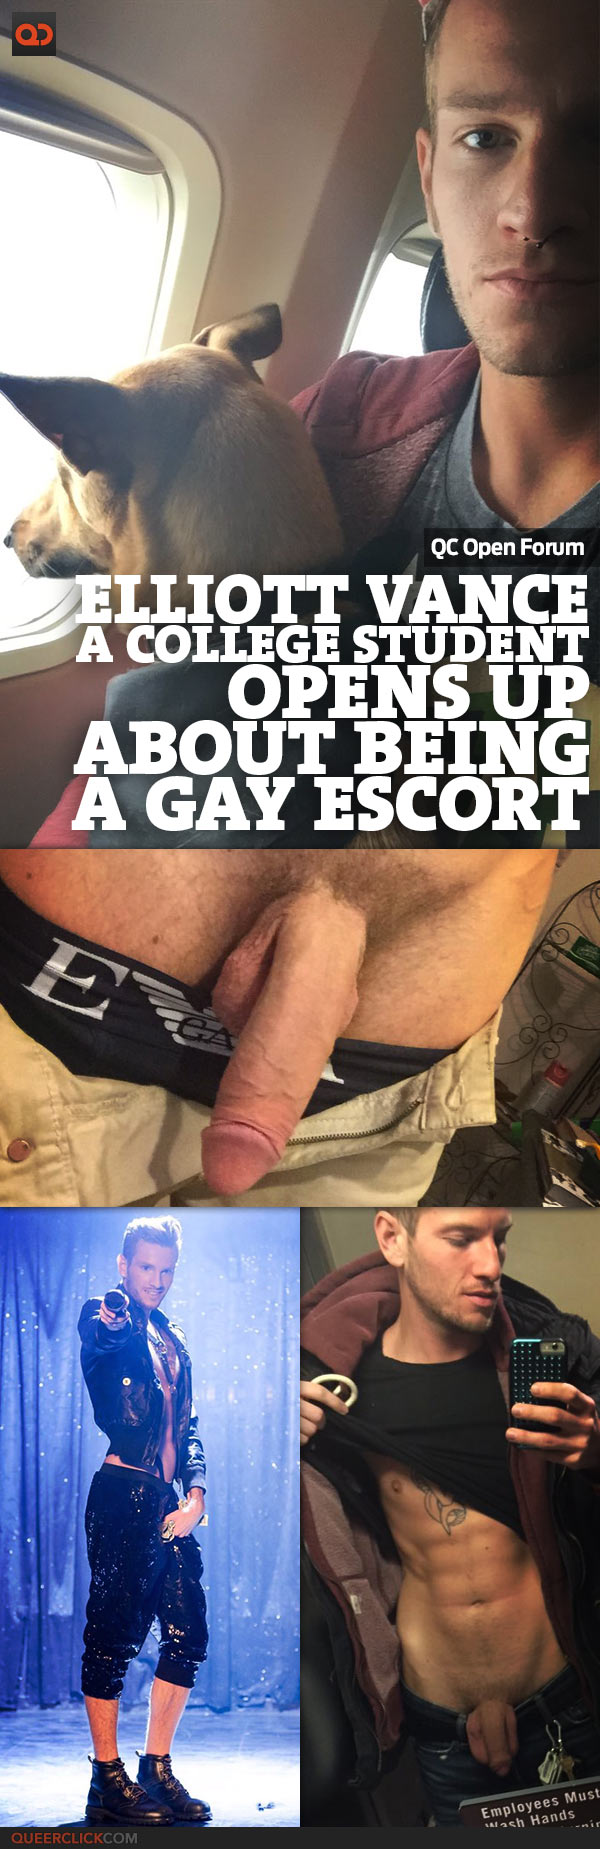 QC Open Forum: Elliott Vance, A College Student, Opens Up About Being A Gay Escort